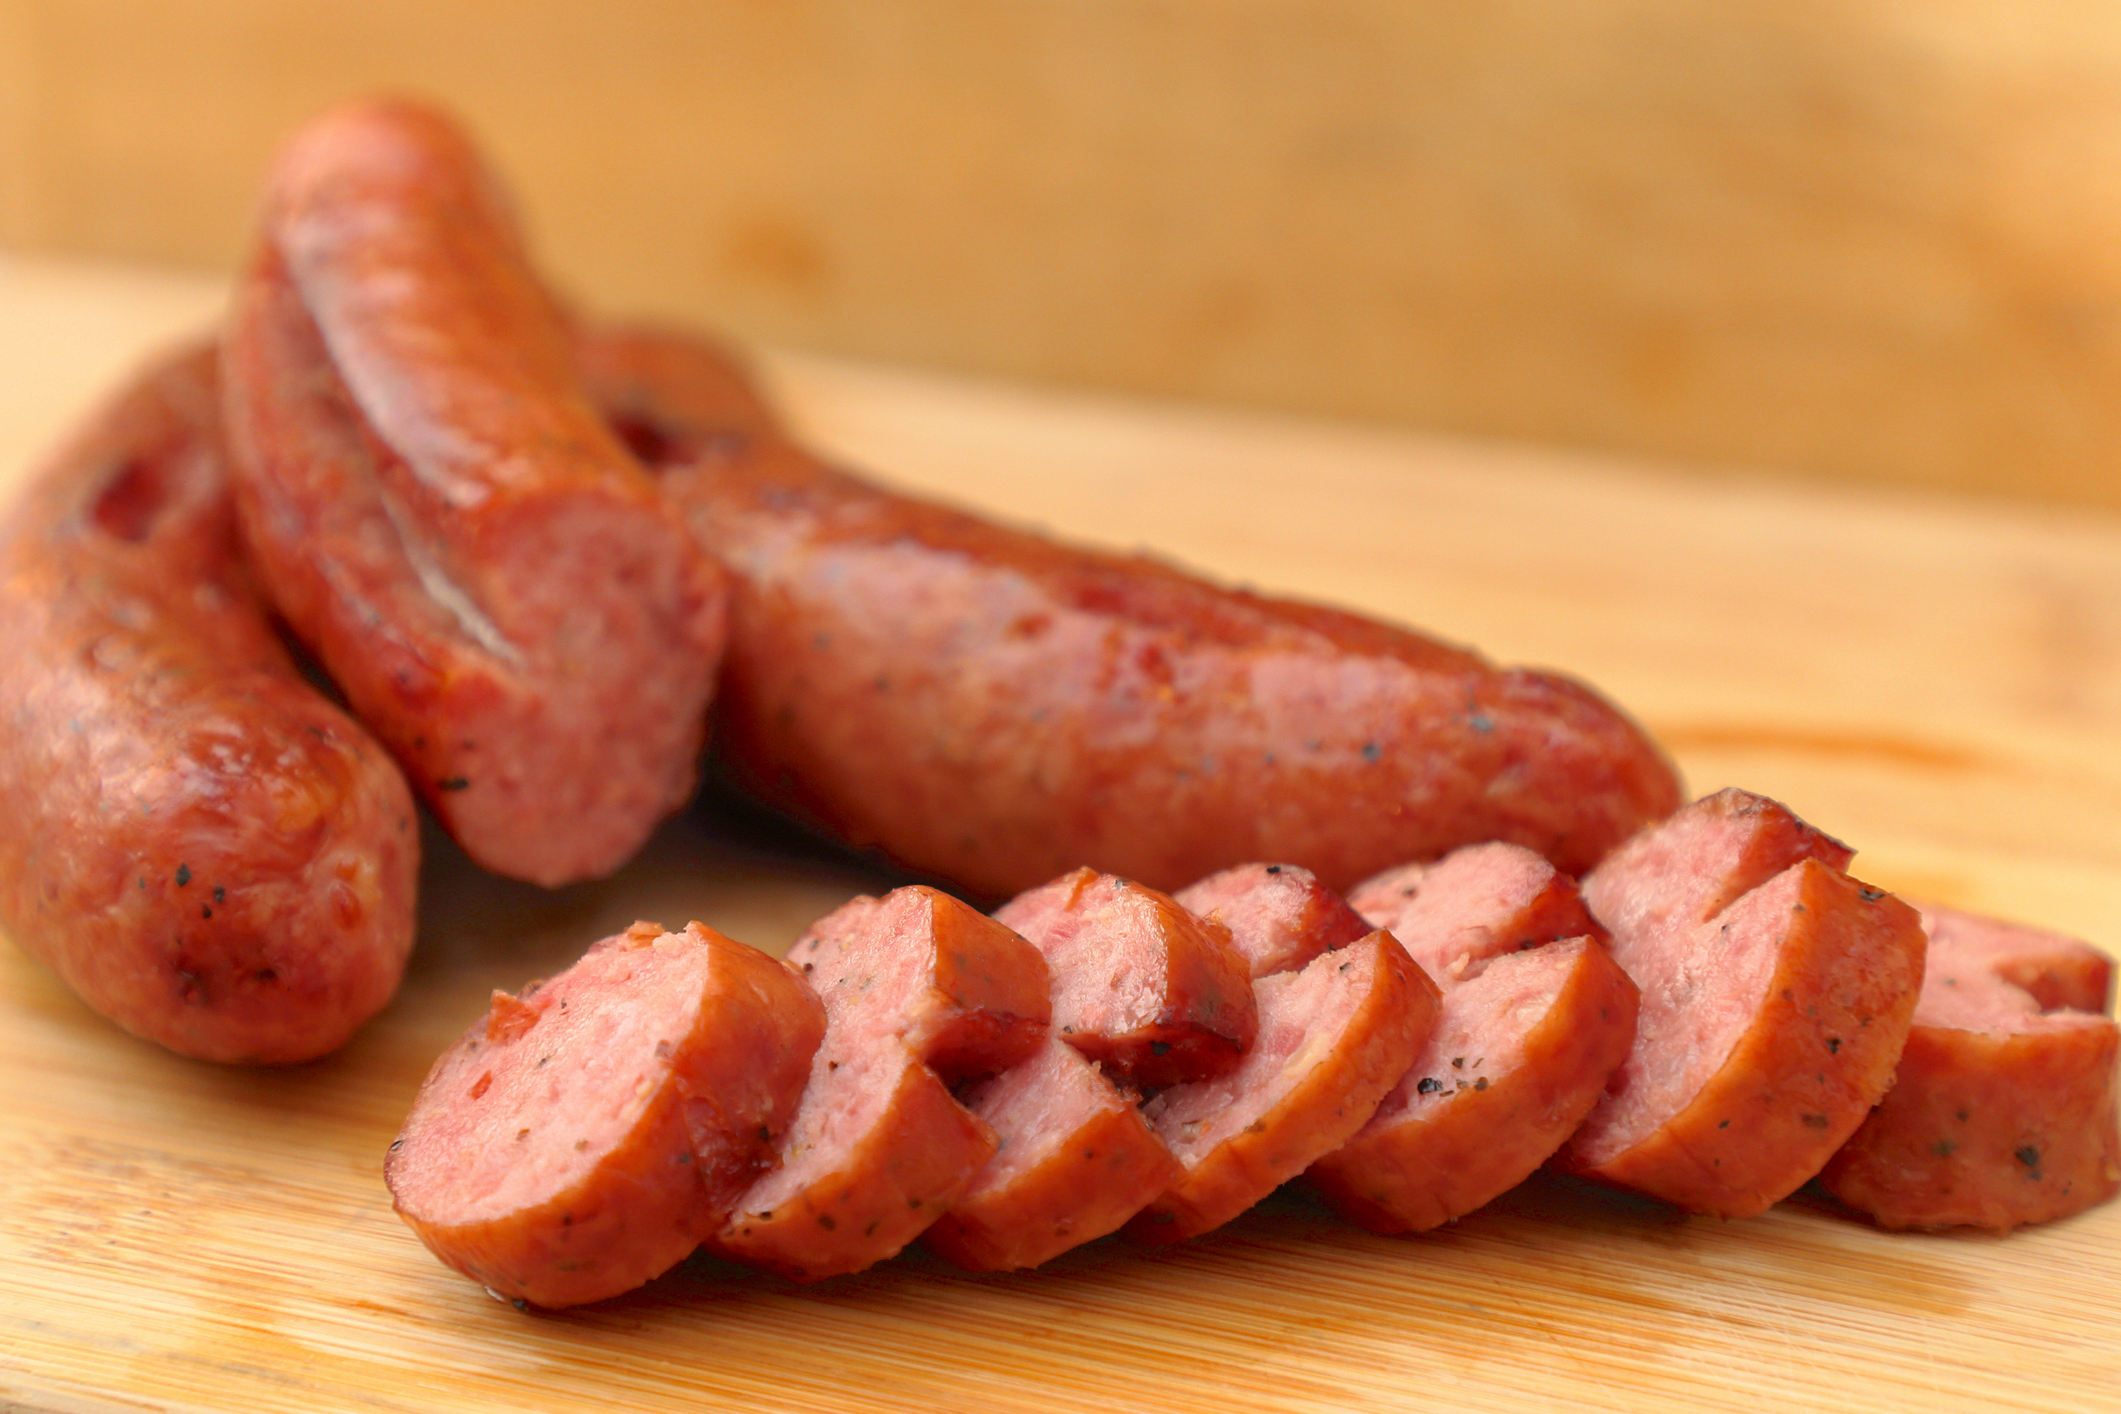 A picture of the smoked sausage sliced on the wooden table. The front row of sausage slices are in-focus.